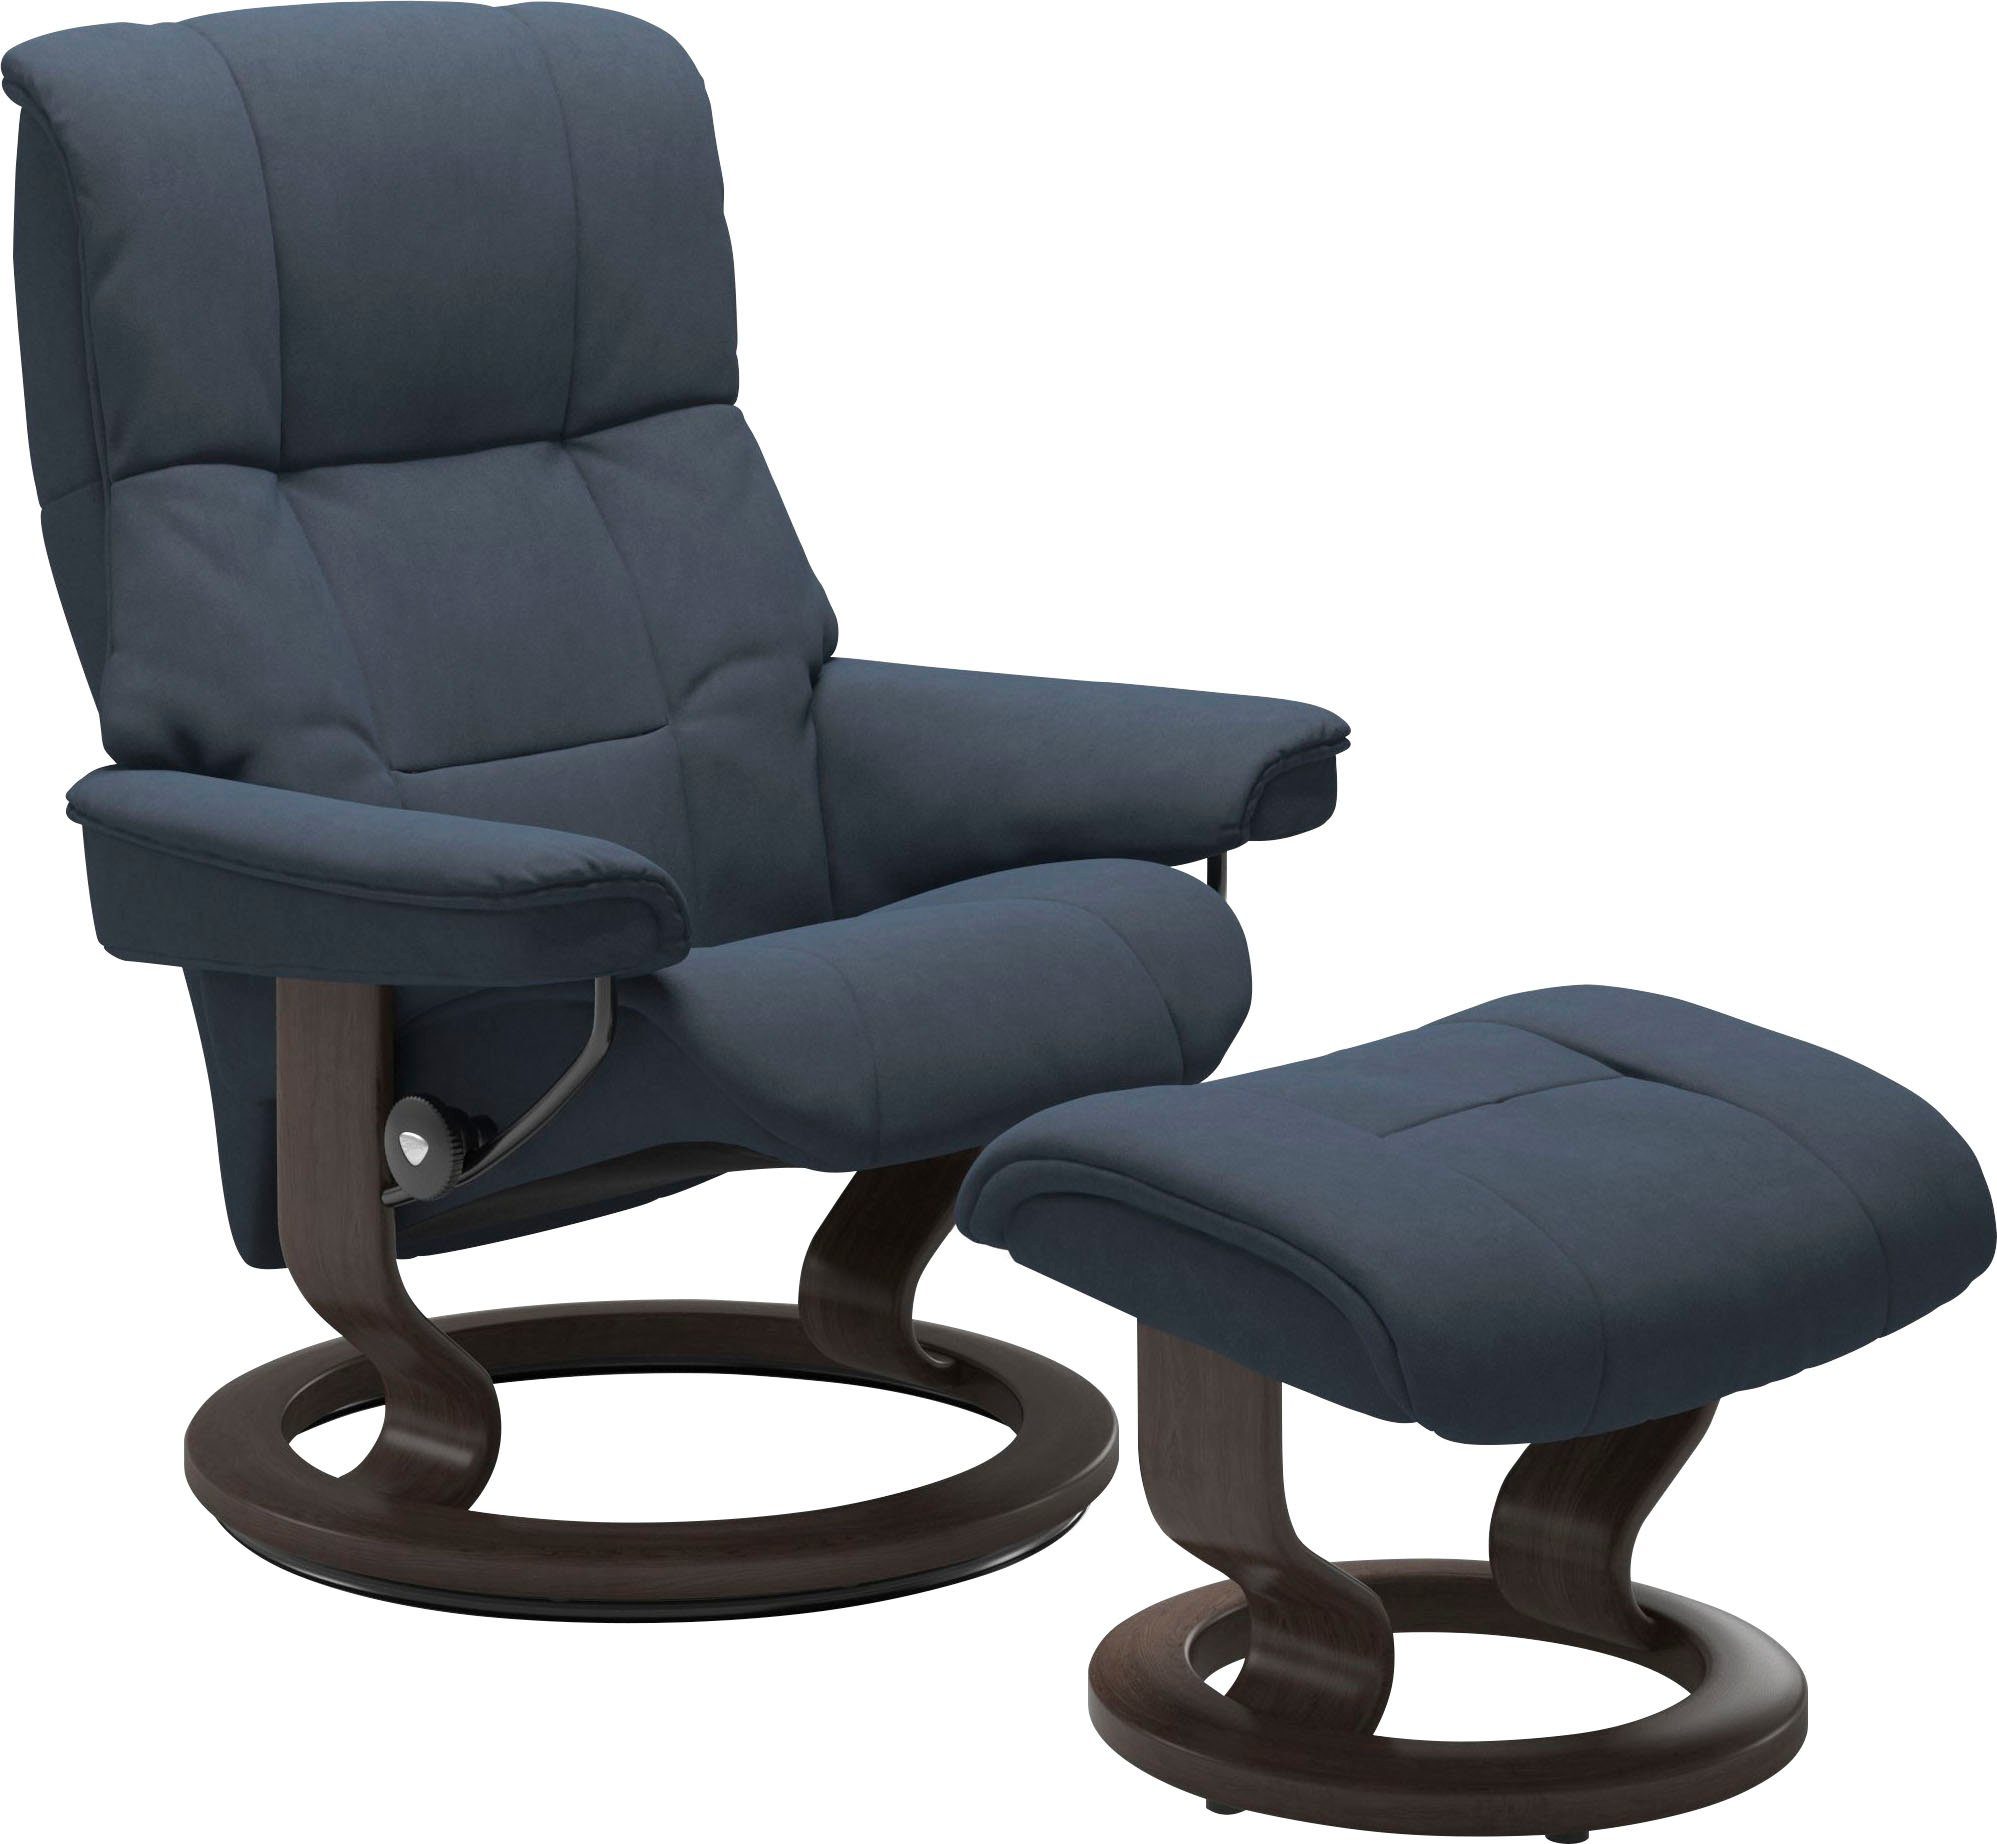 Stressless® Relaxsessel Mayfair, mit Classic Base, Размер S, M & L, Gestell Wenge